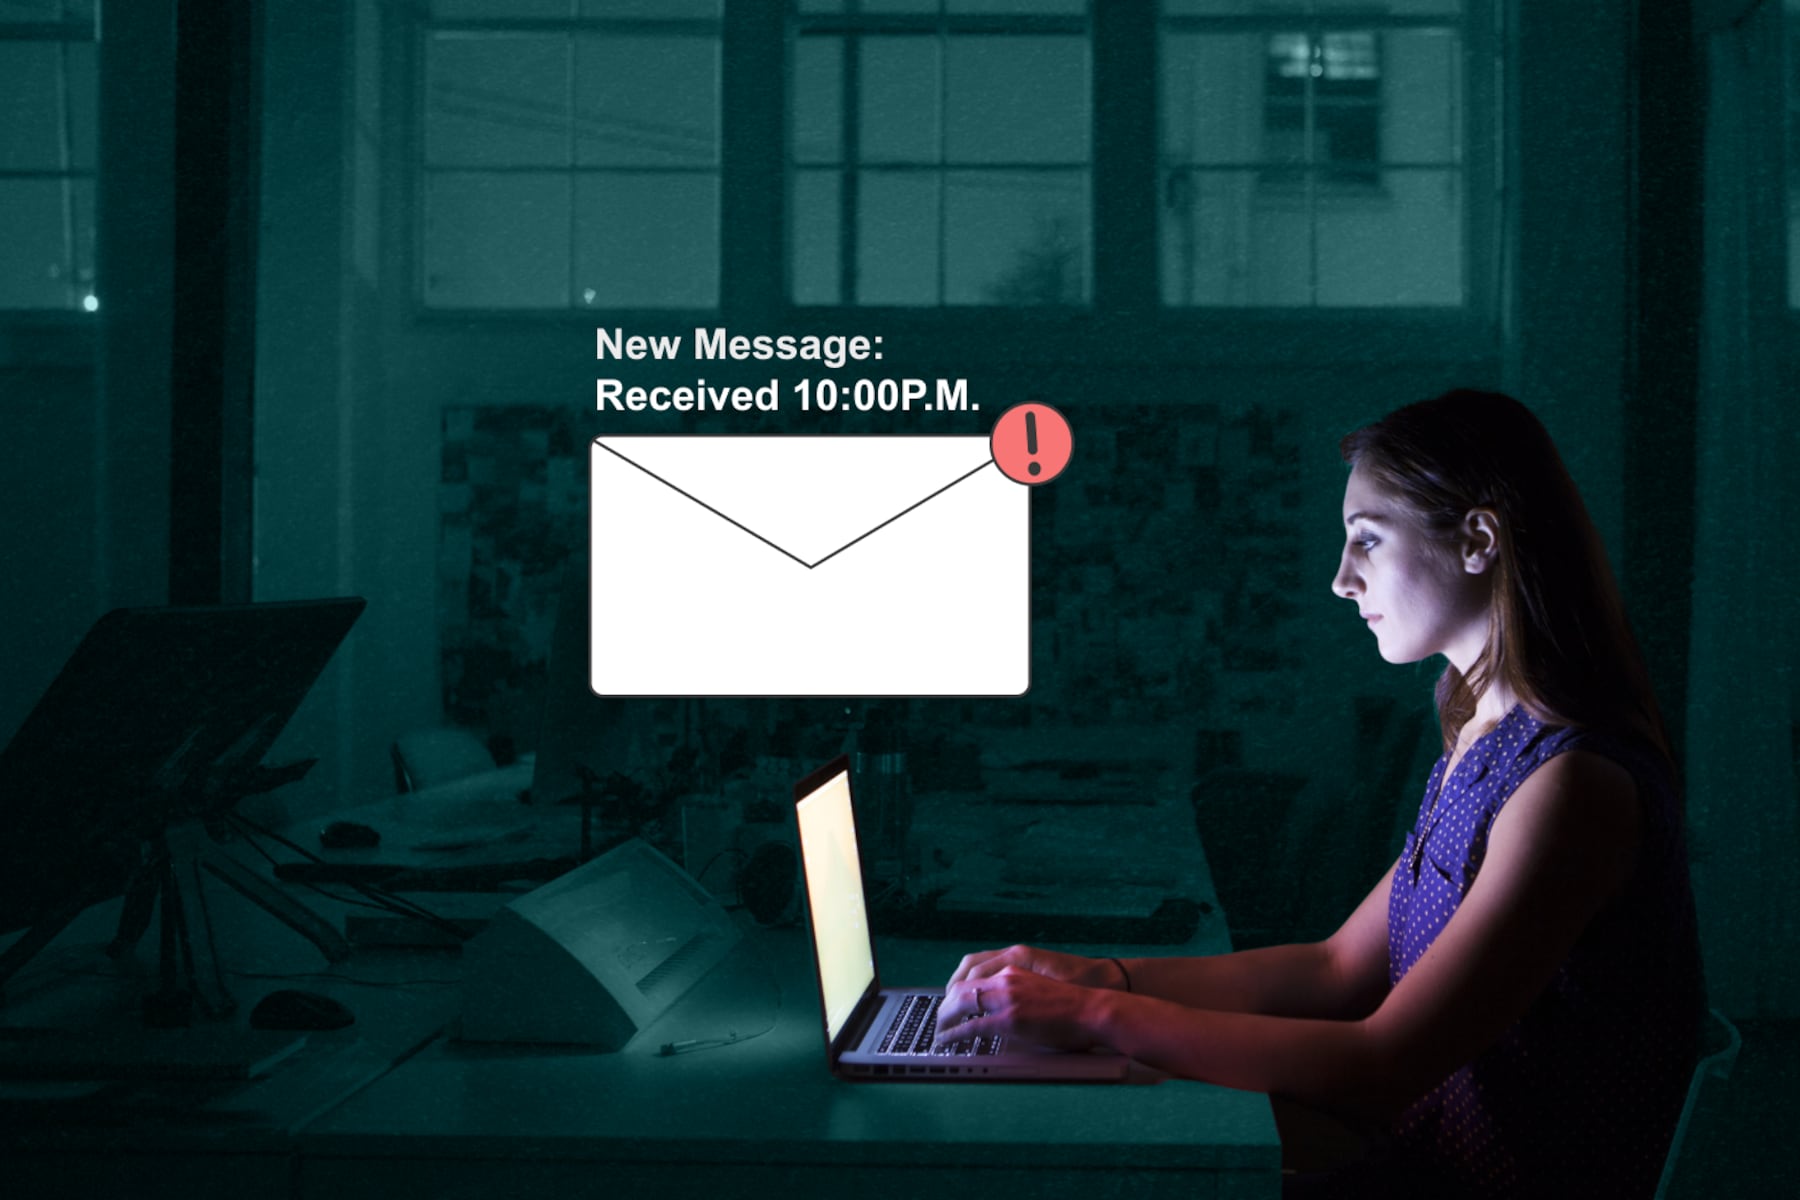 A teacher sitting at a desk checking email late at night. An illustration of an email floating above her computer screen, with a notification reading: “New Message: Received at 10:00 P.M.”